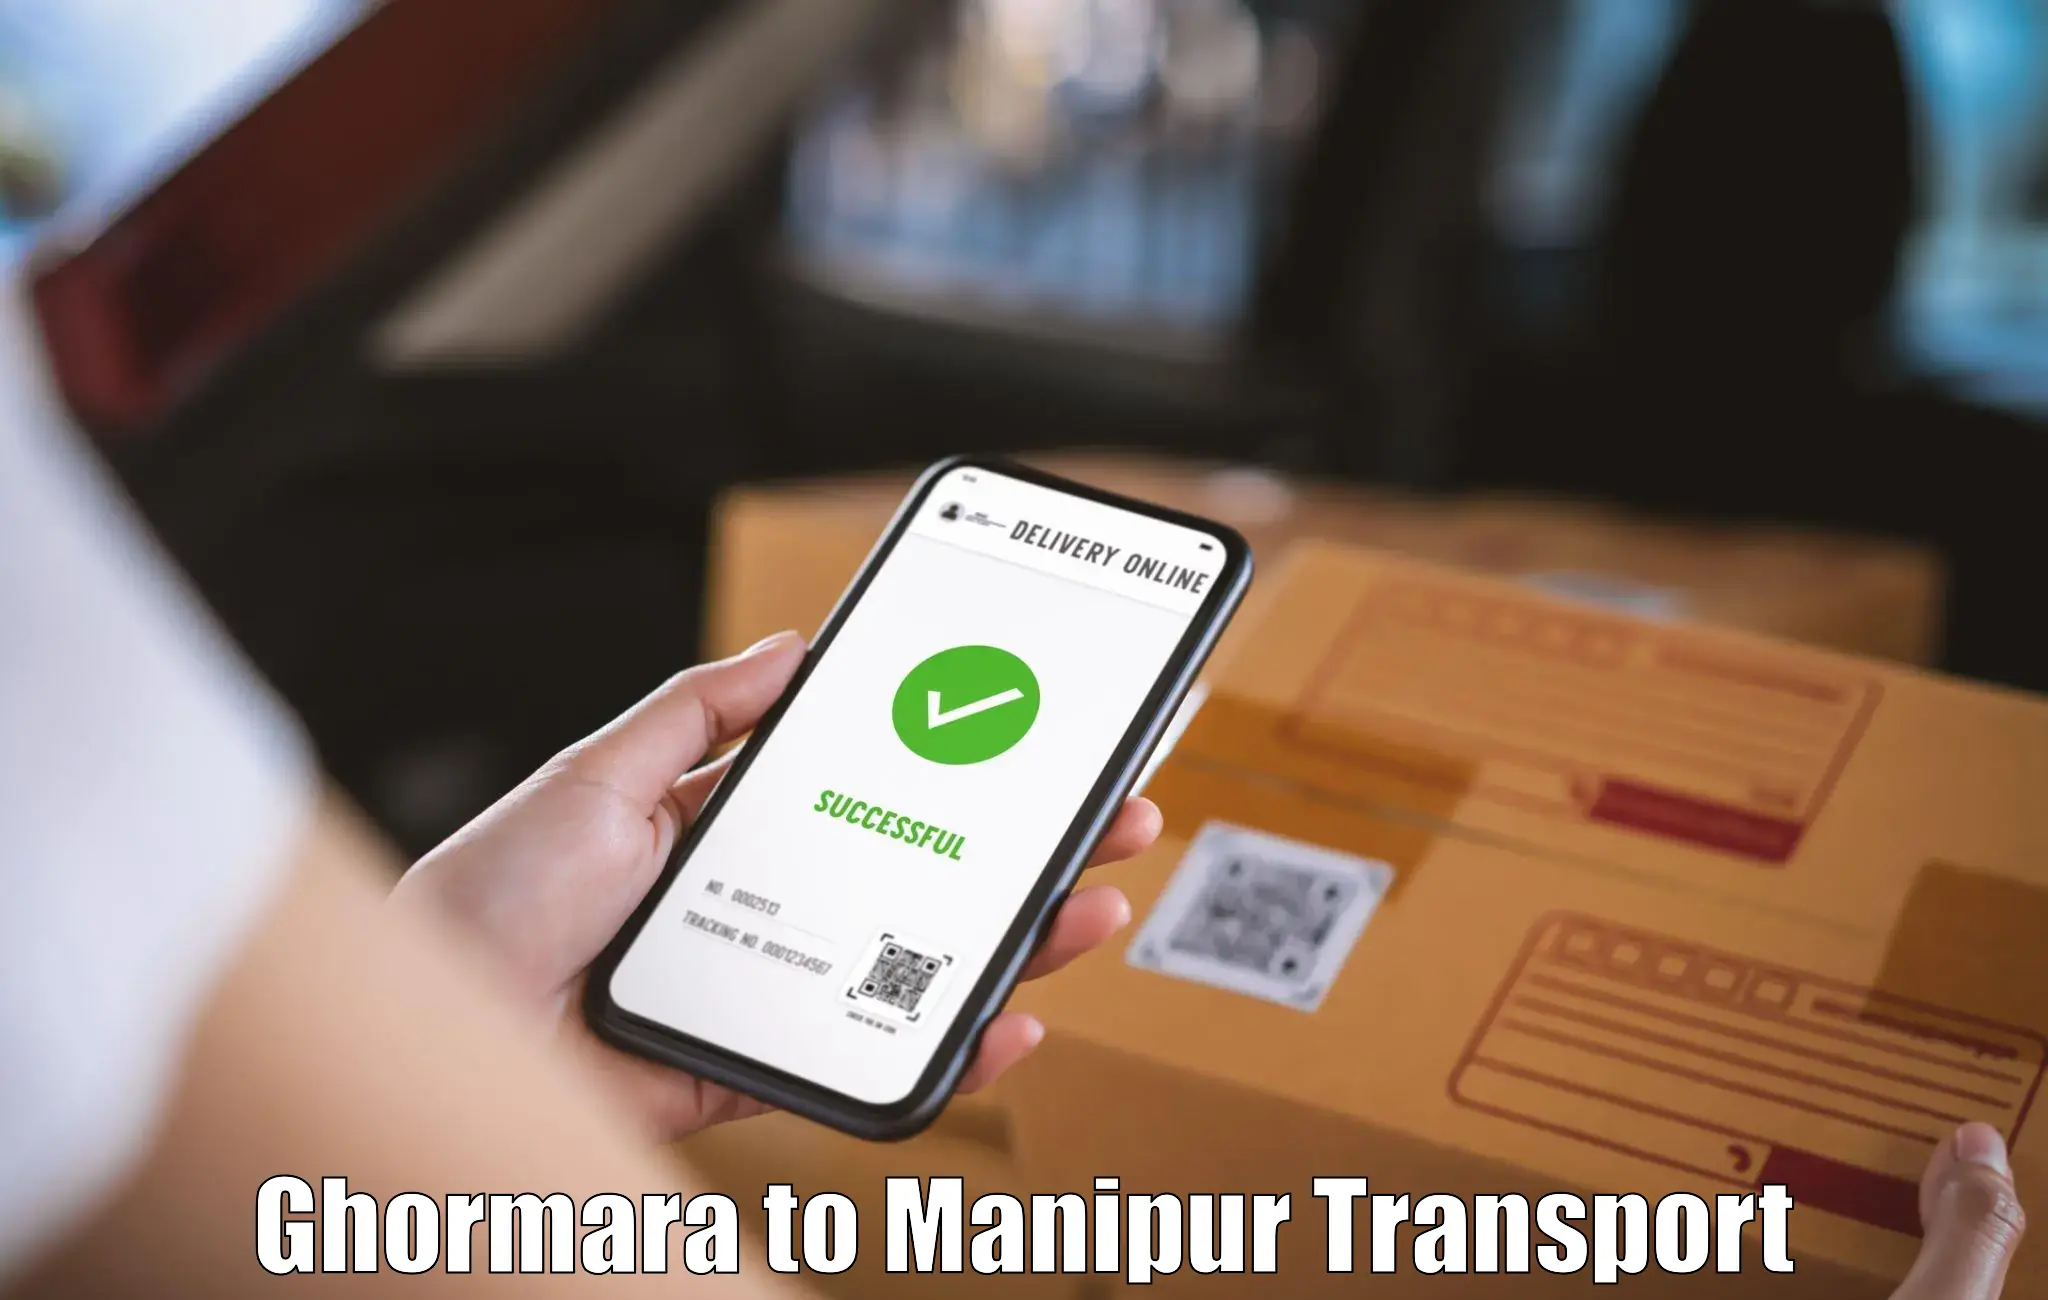 Nearby transport service Ghormara to Manipur